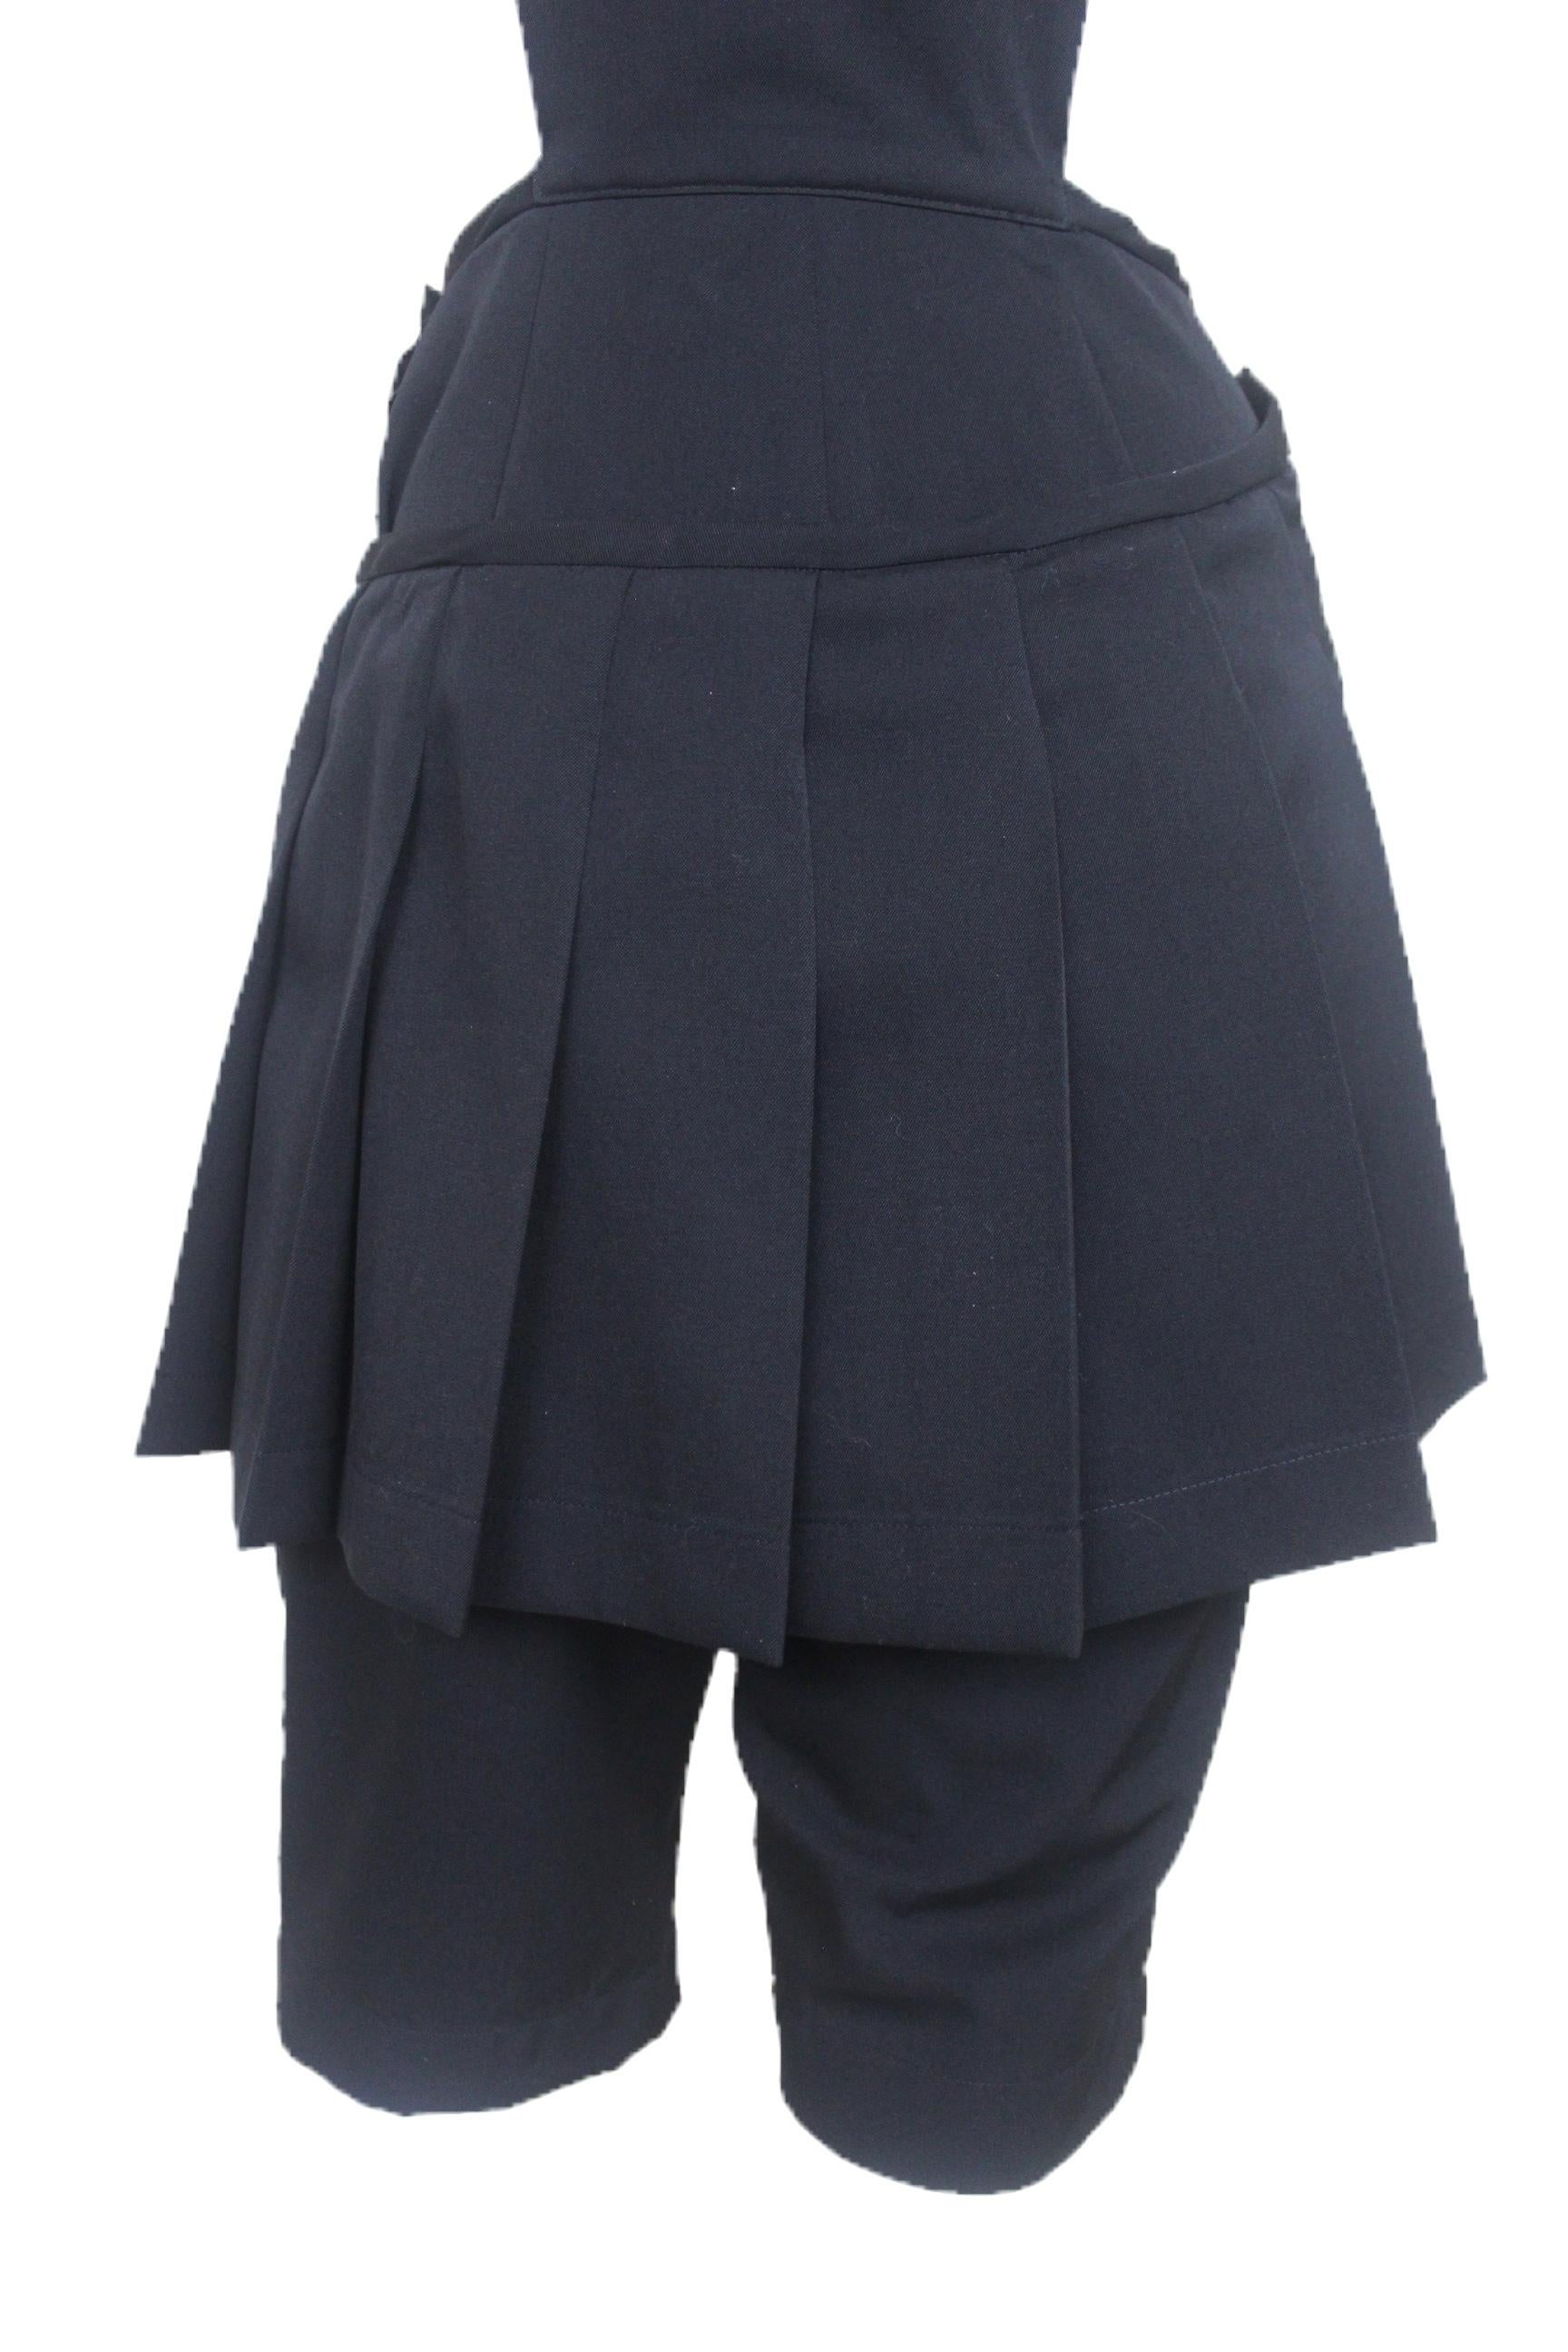 Black Comme des Garcons 1989 Collection Reverse Dungarees with attached Skirt For Sale